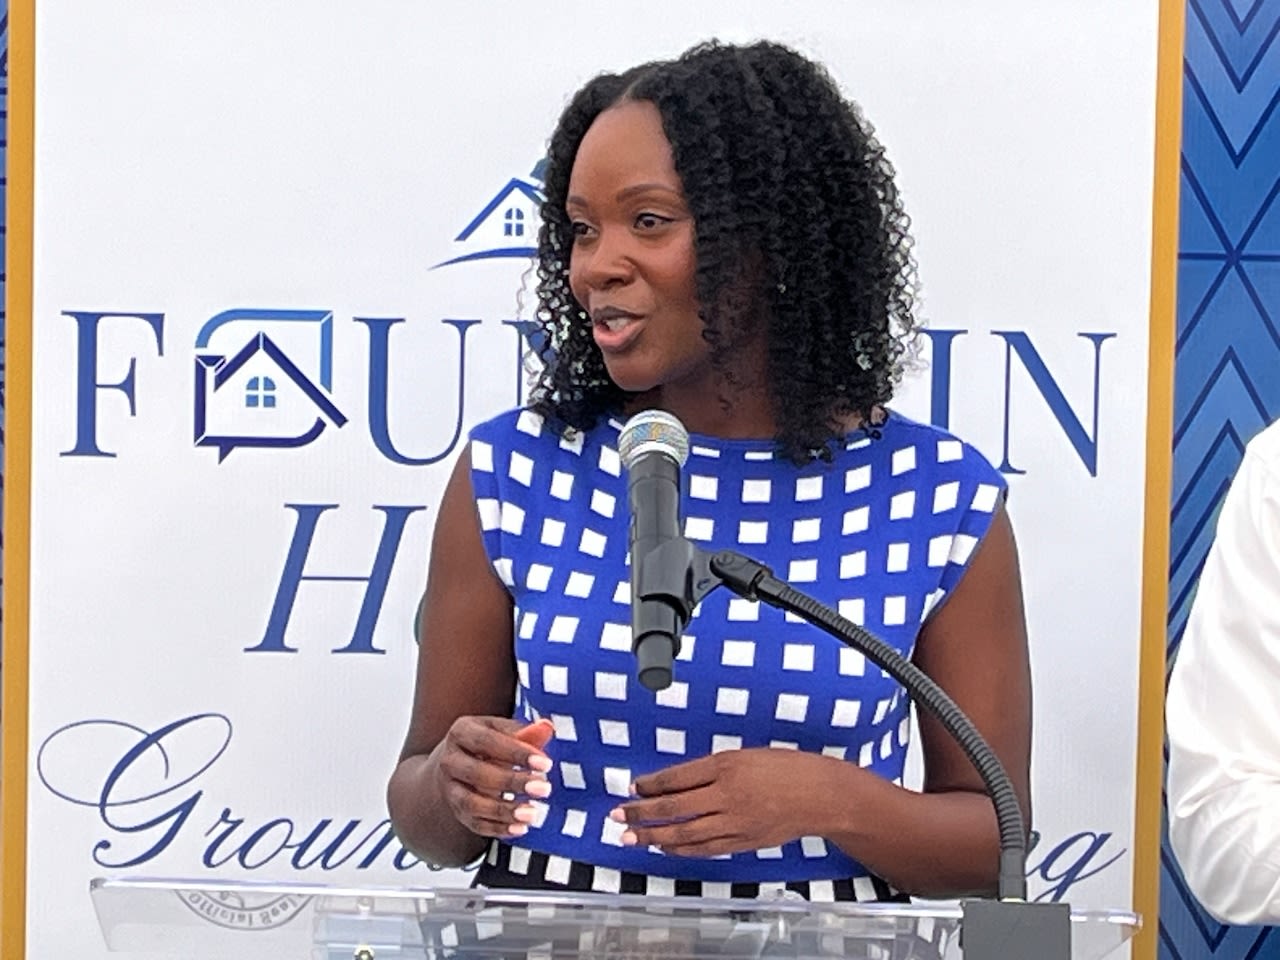 ‘Didn’t get into this business to cut grass,’ Woodfin says as Birmingham launches new home program